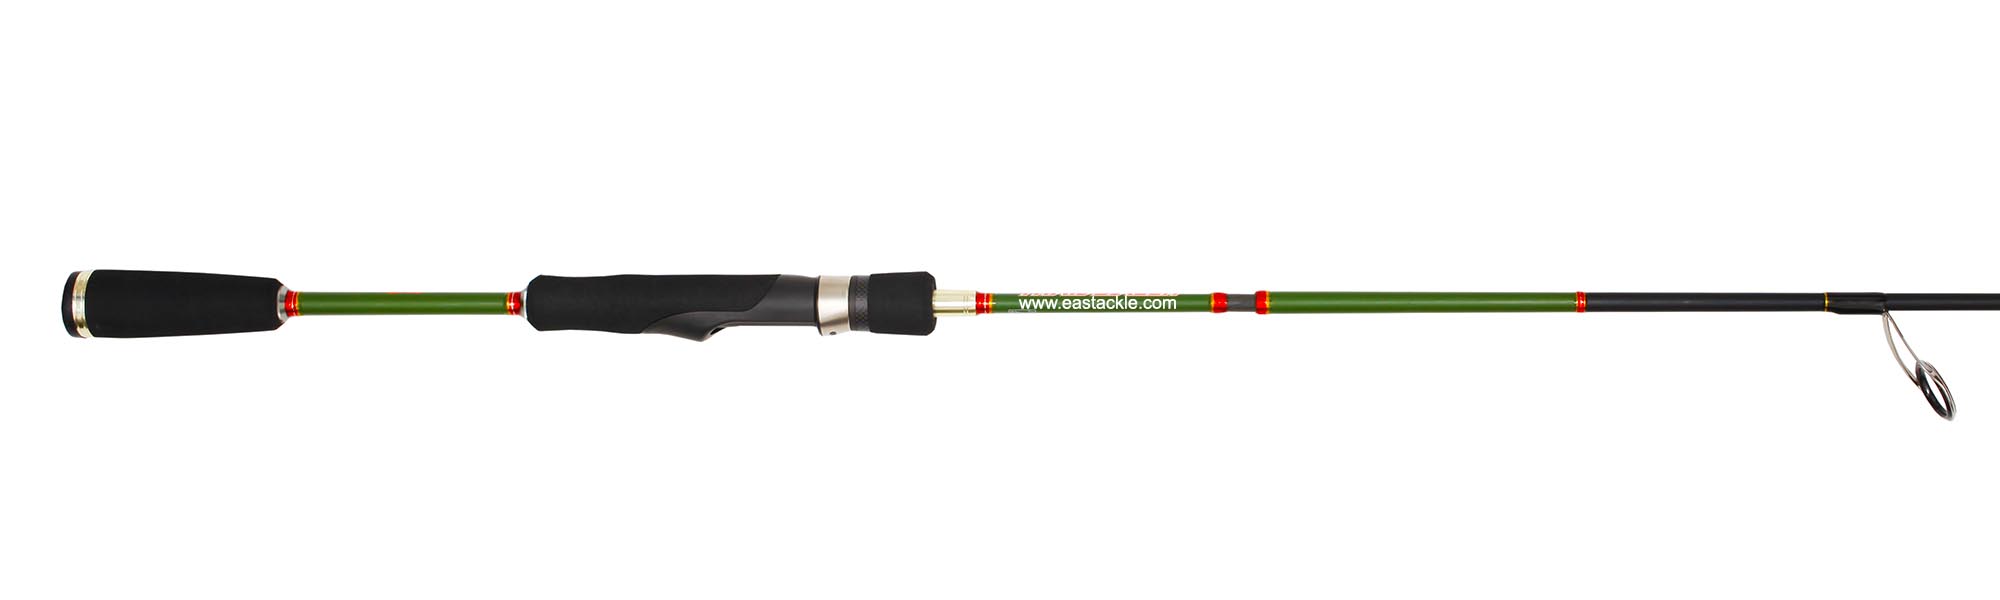 Rapala - Trail Blazer - TRS664LF - Spinning 4 Piece Travel Rod - Rear Section | Eastackle